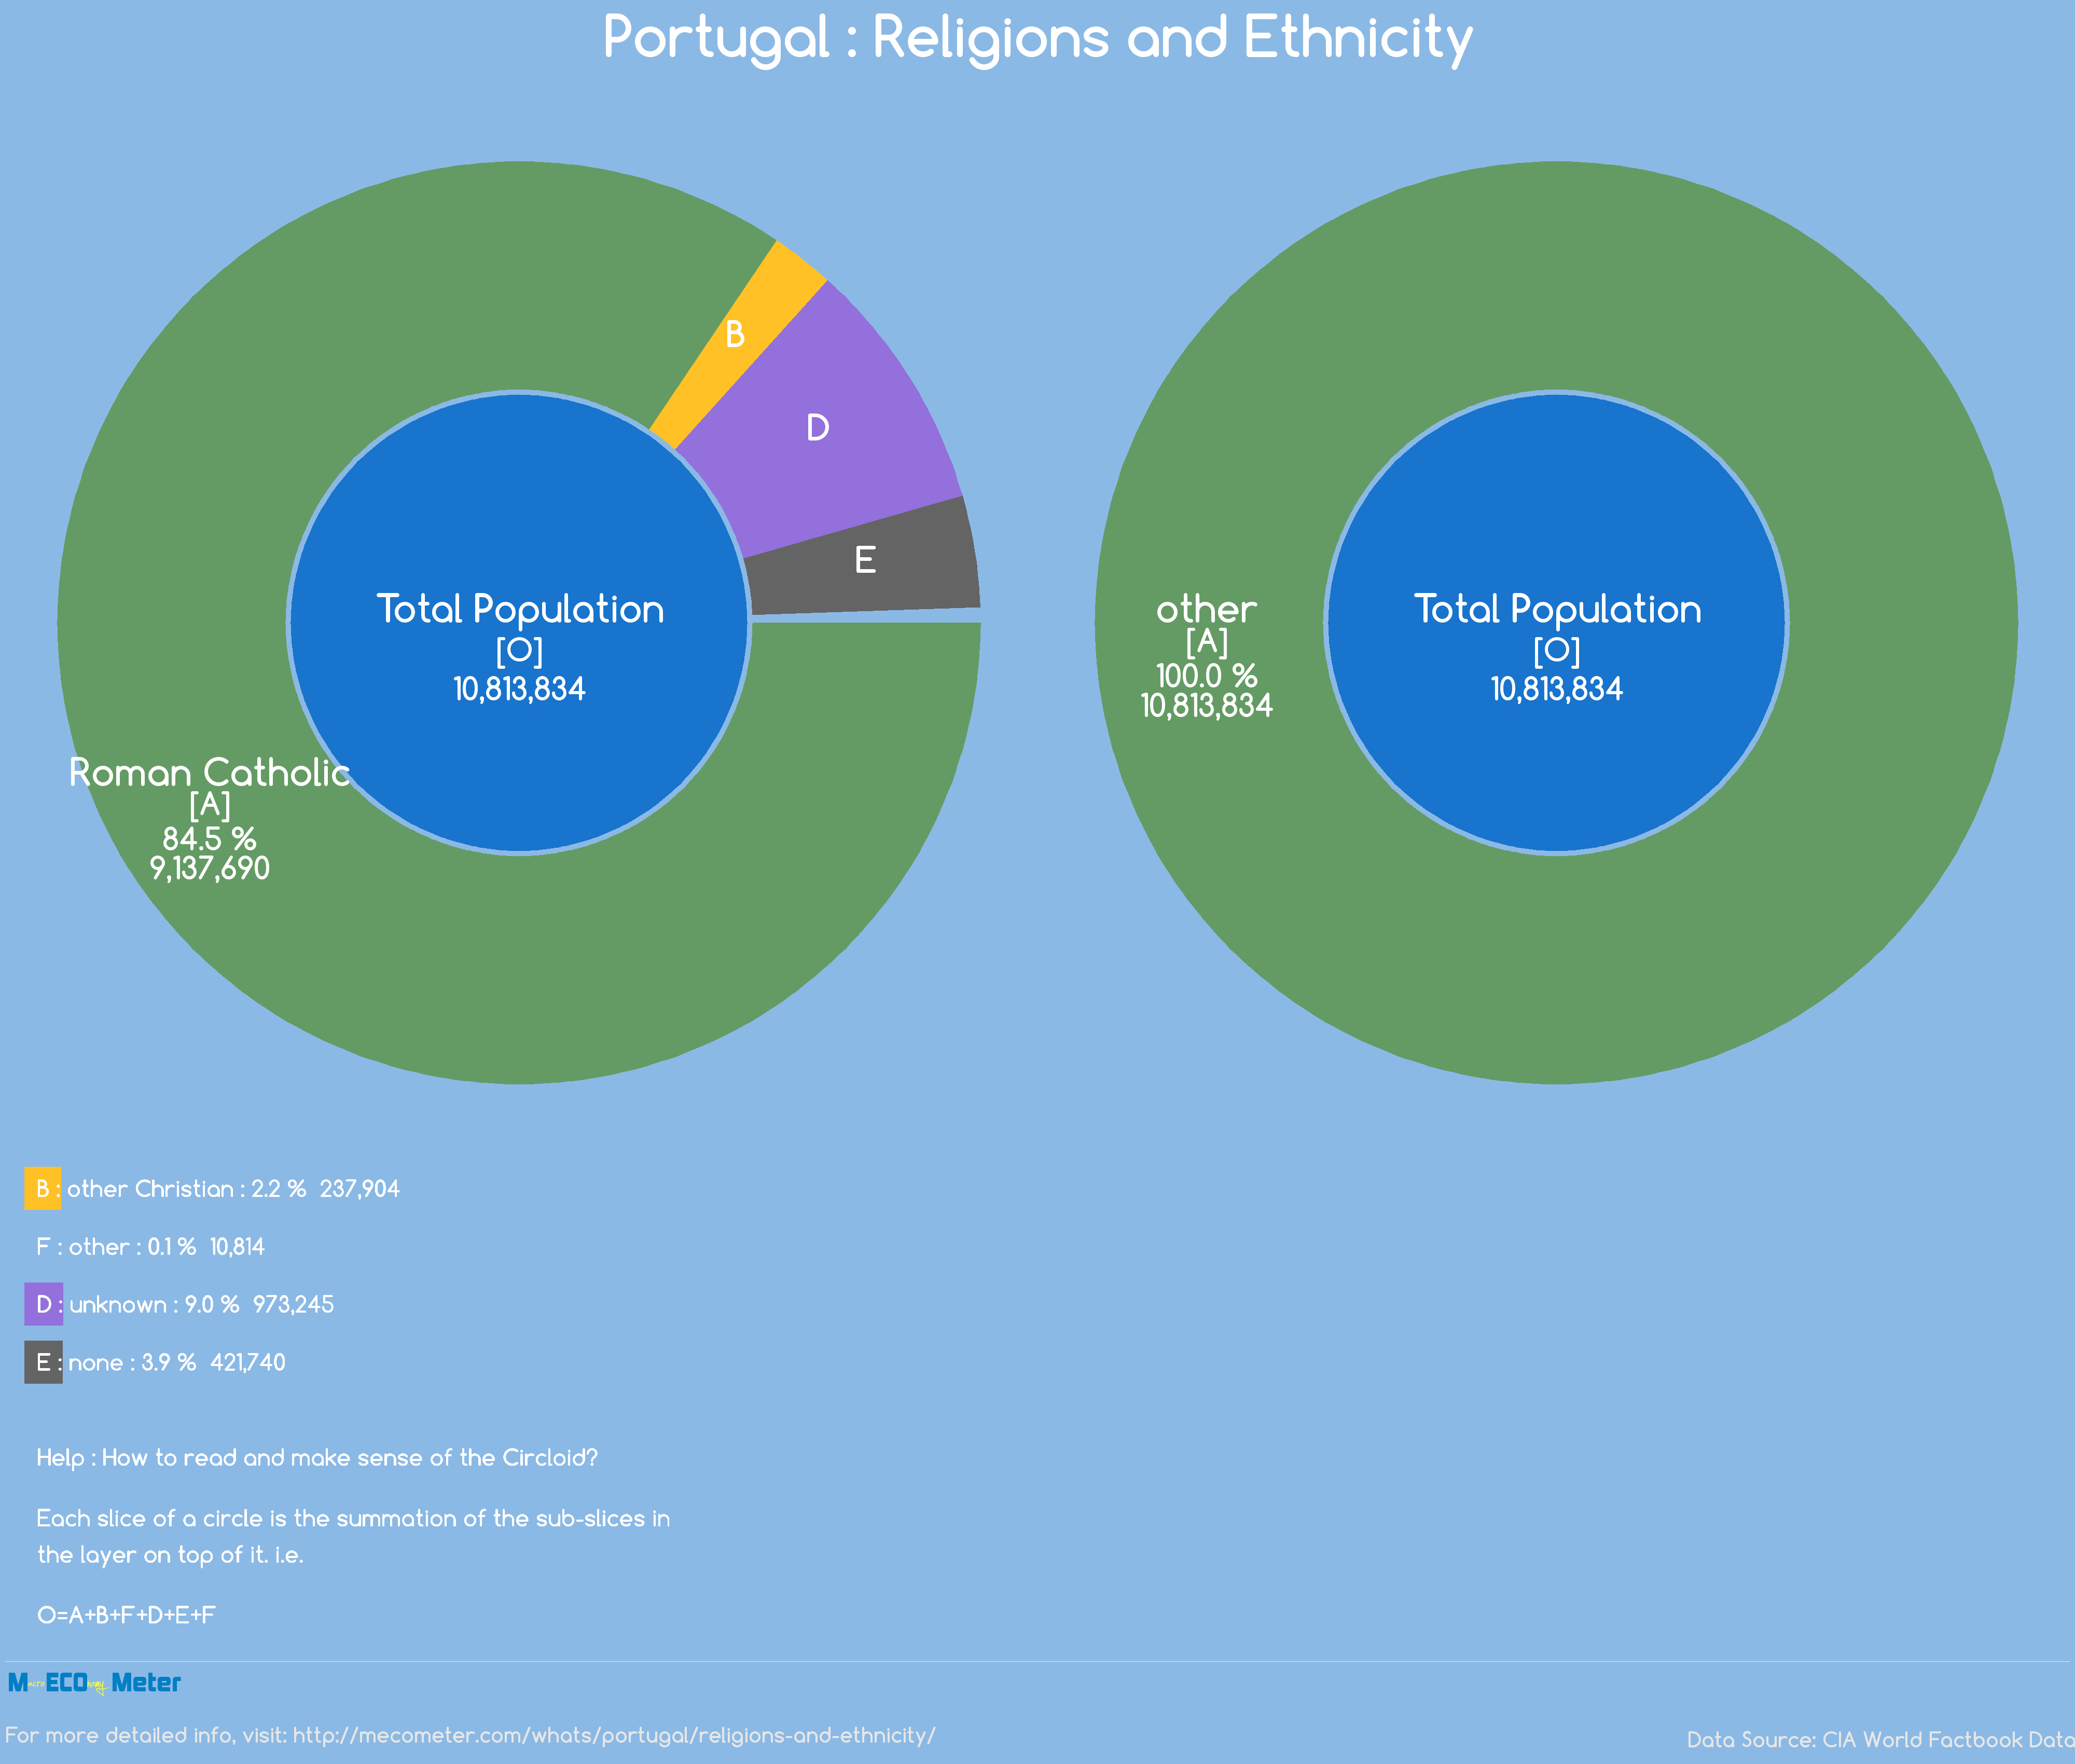 Portugal : Religions and Ethnicity